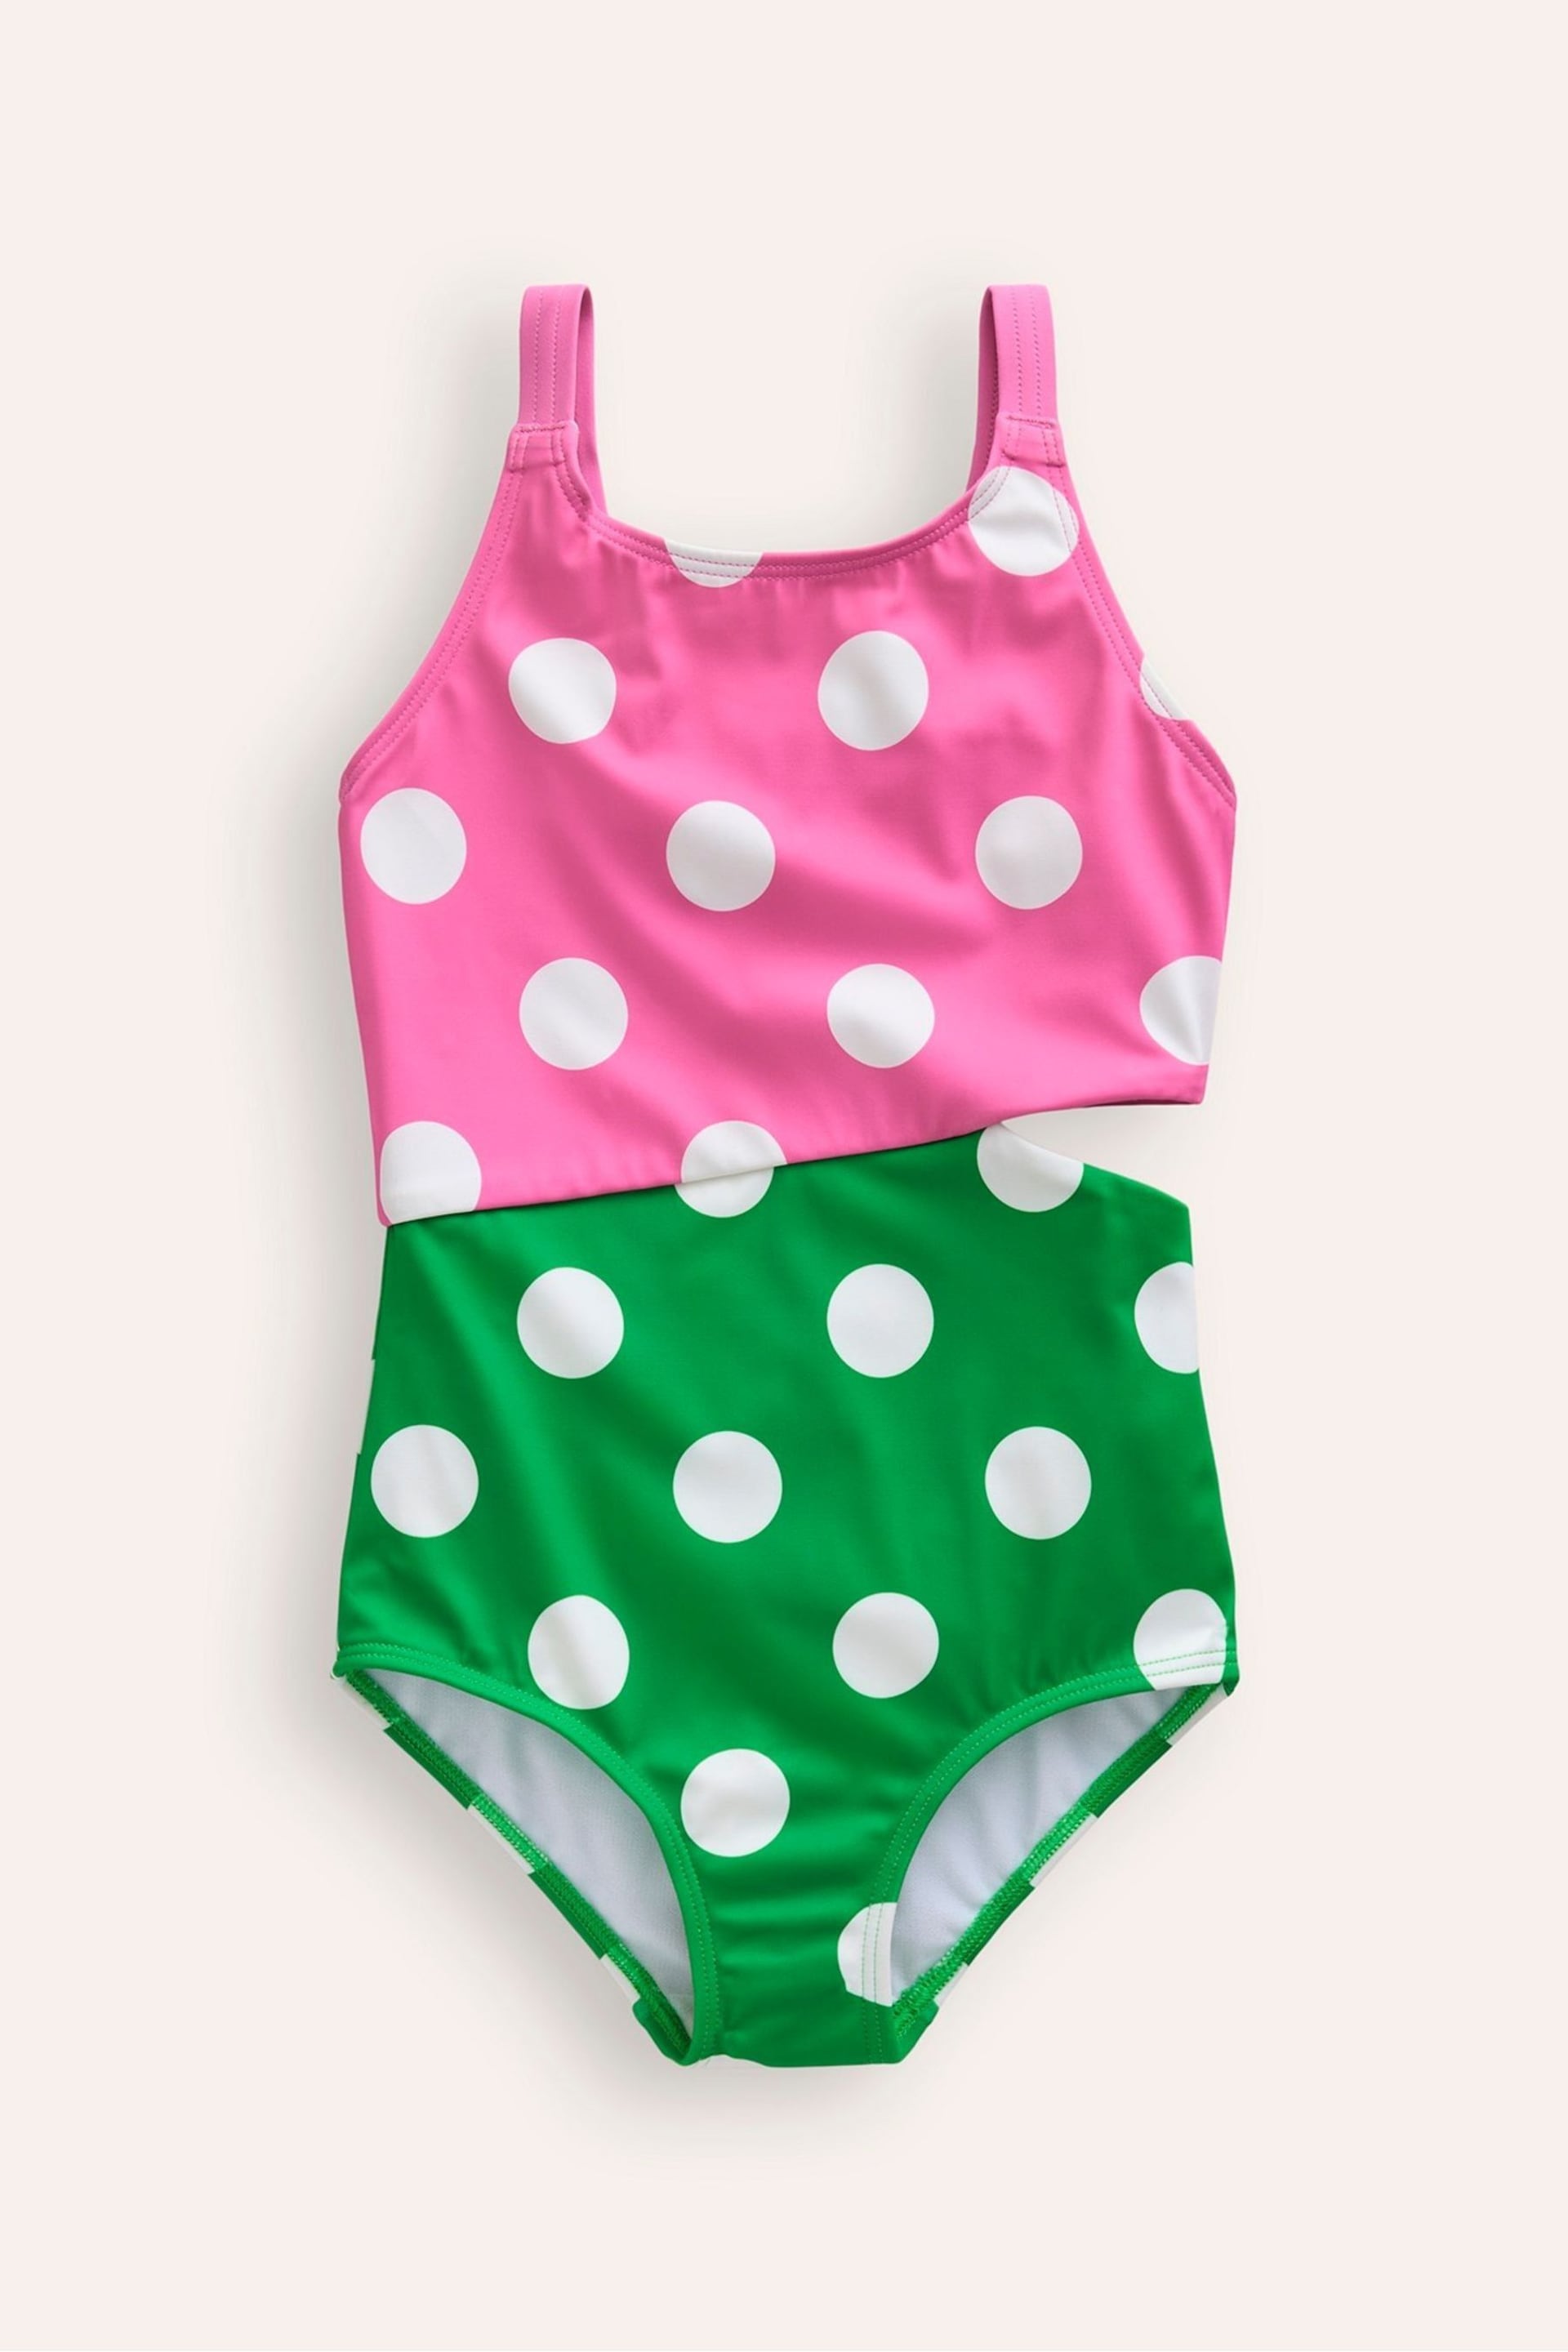 Boden Pink Rainbow Cut-Out Swimsuit - Image 1 of 3